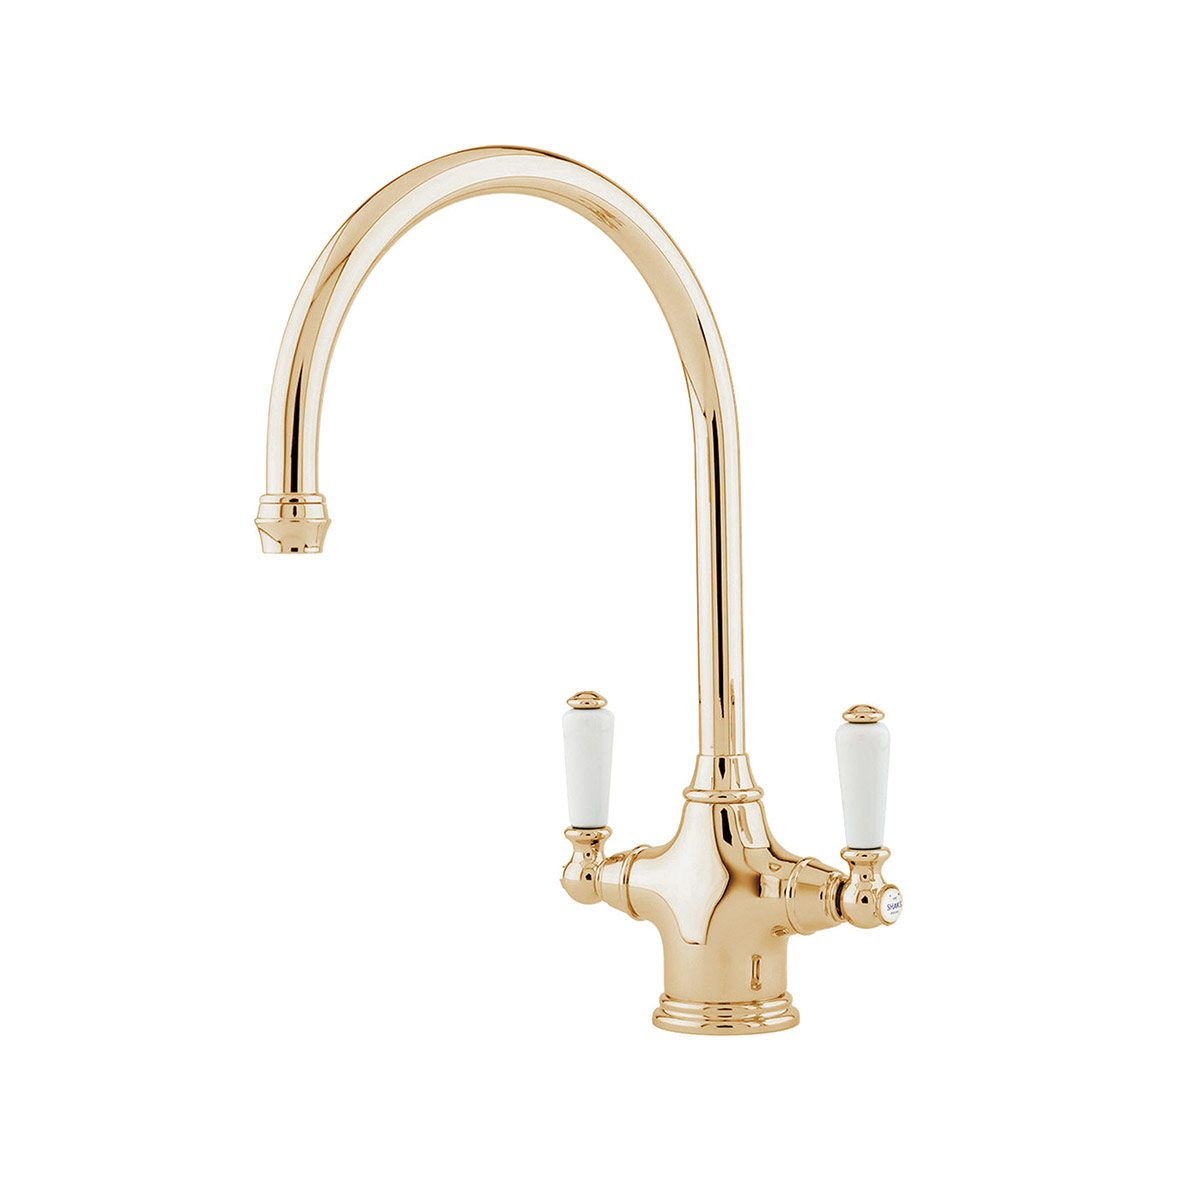 Shaws by Perrin & Rowe Ribble kitchen mixer in Polished Brass. Phoenician style monobloc kitchen tap AUSH.4460. Distributed in Australia by Luxe by Design, Brisbane.